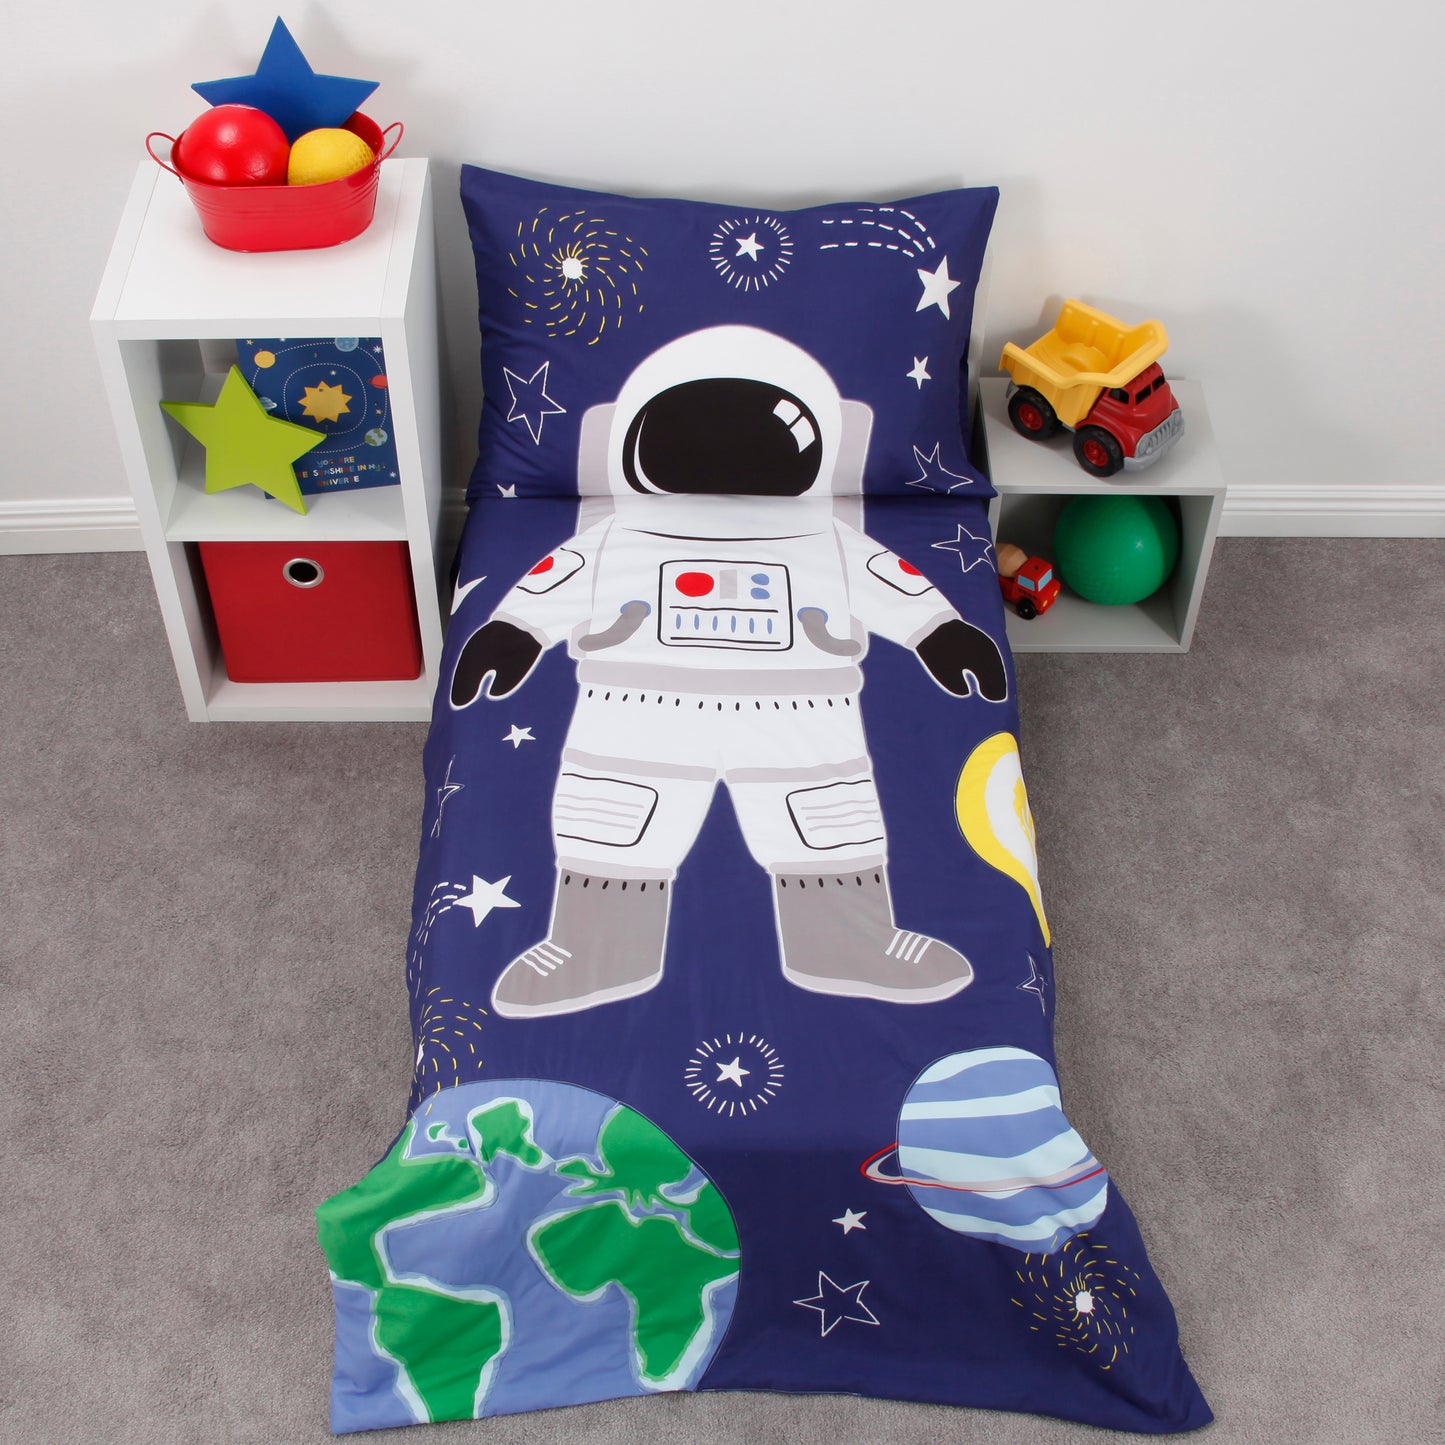 Everything Kids Space Astronaut - Navy, Green and Yellow Glow in the Dark 4 Piece Toddler Bed Set - Comforter, Flat Top Sheet, Fitted Bottom Sheet and Reversible Pillowcase